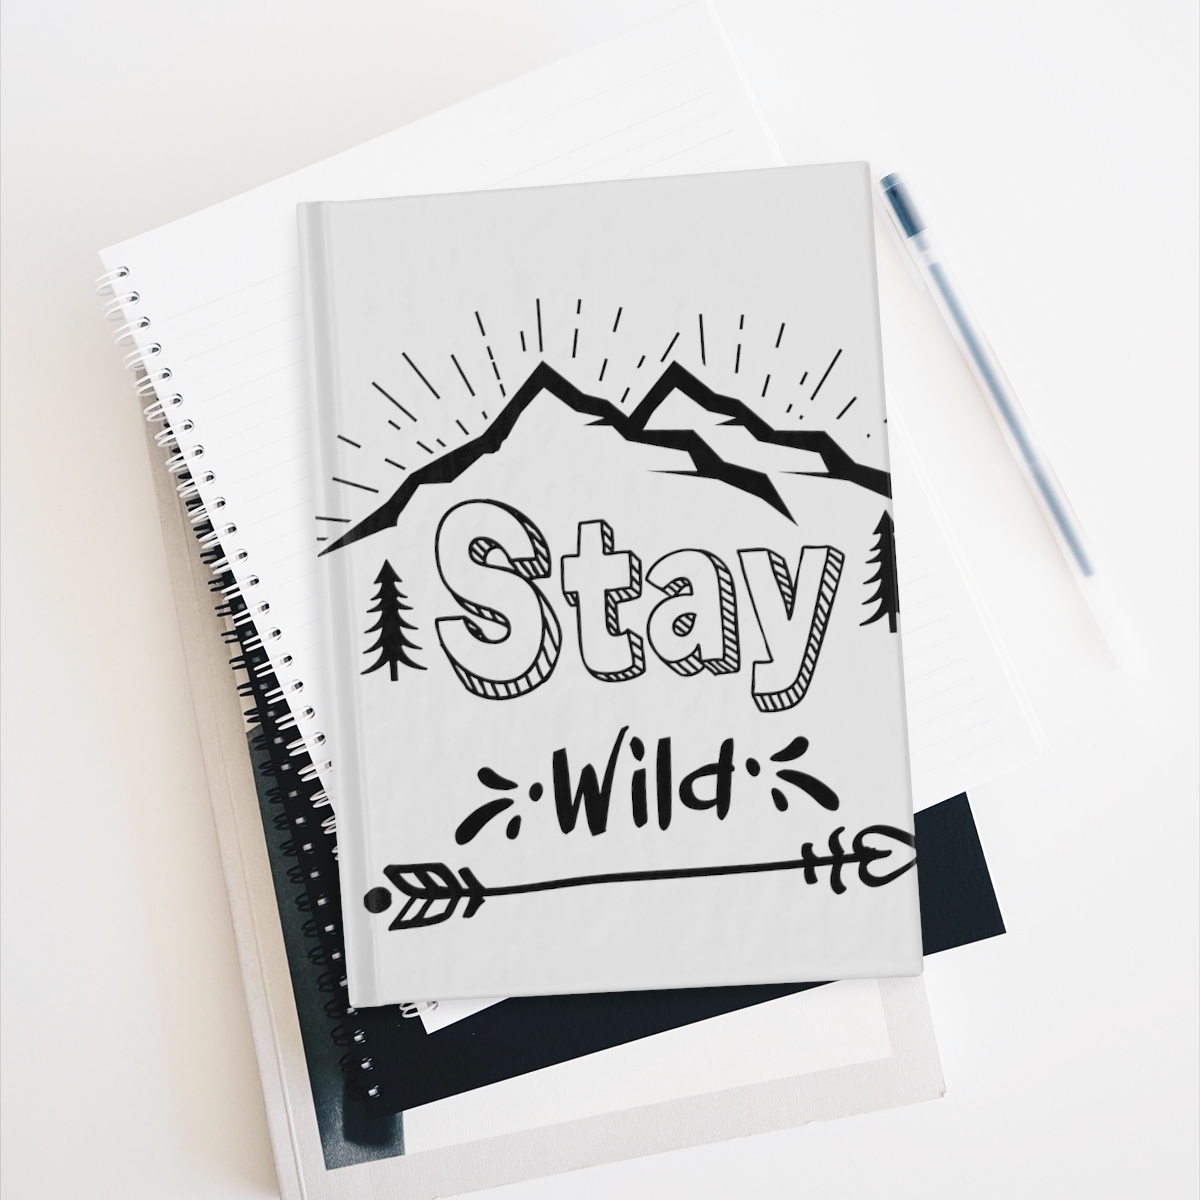 128 Page "Stay Wild" Ruled Line Hardcover Journal - $26.78